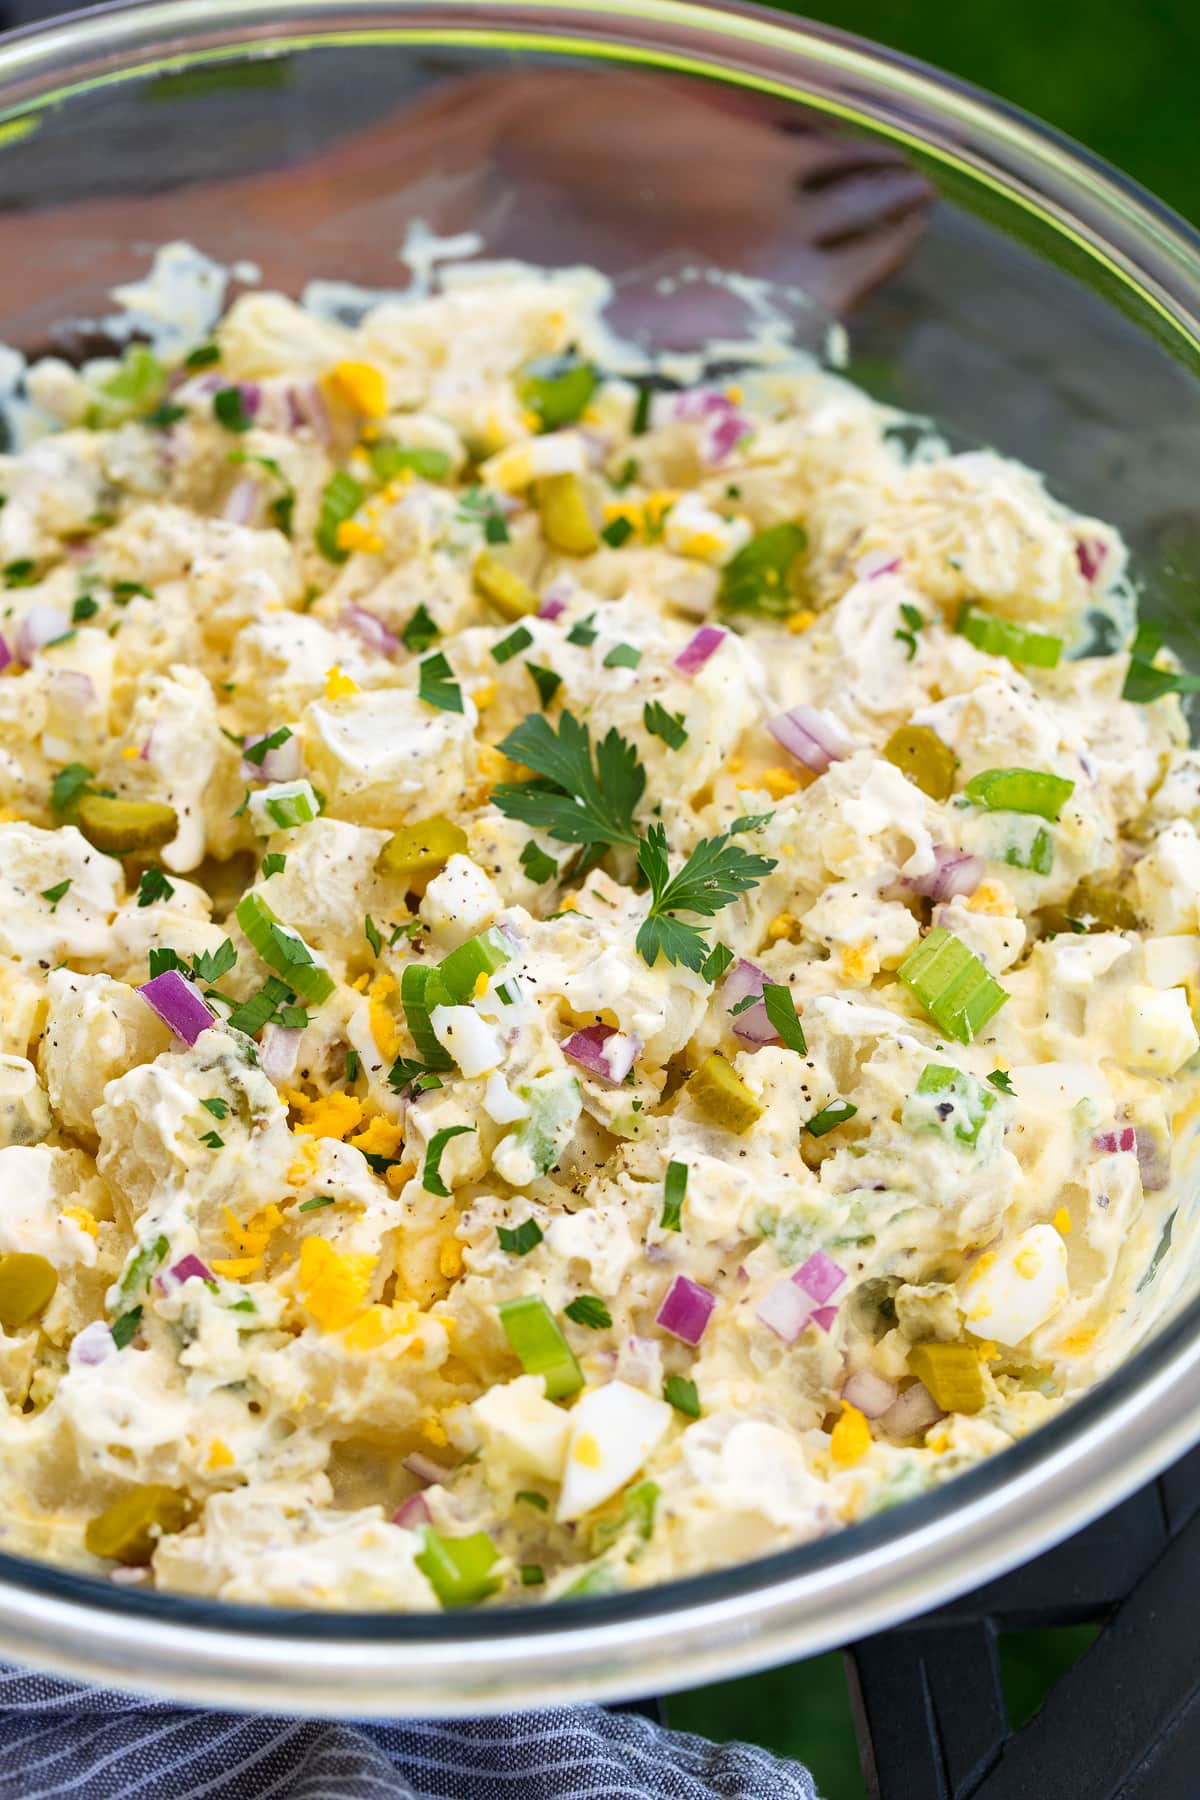 Potato Salad The Best! Creamy and Delicious | Cooking Classy | Bloglovin’